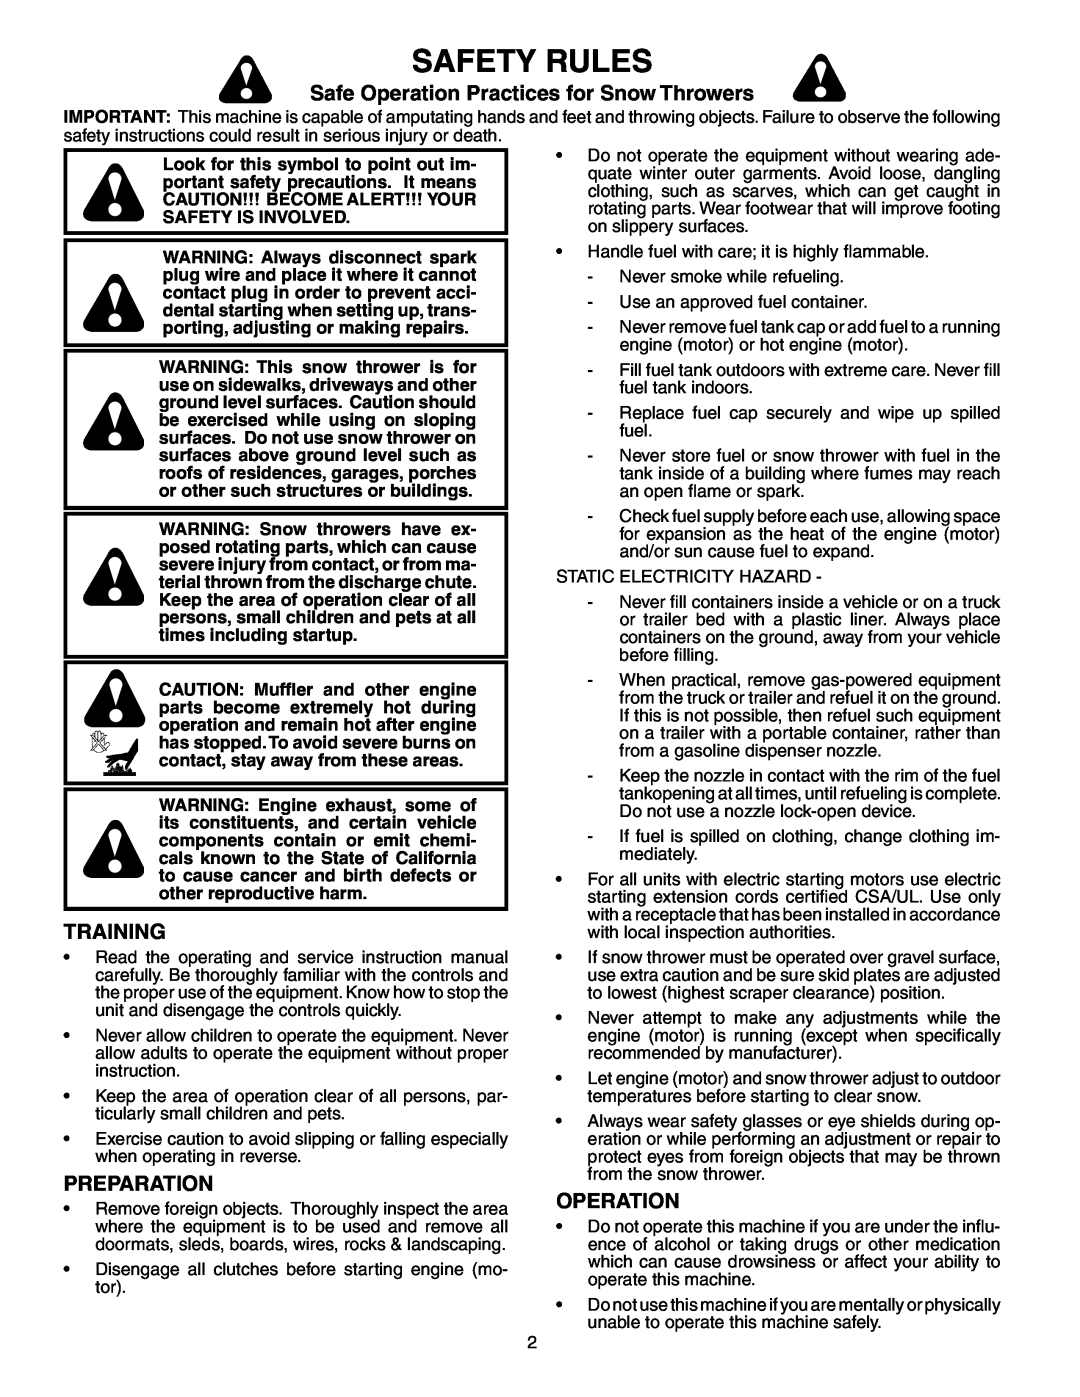 Poulan PP927ESC owner manual Safety Rules, Safe Operation Practices for Snow Throwers, Training, Preparation 